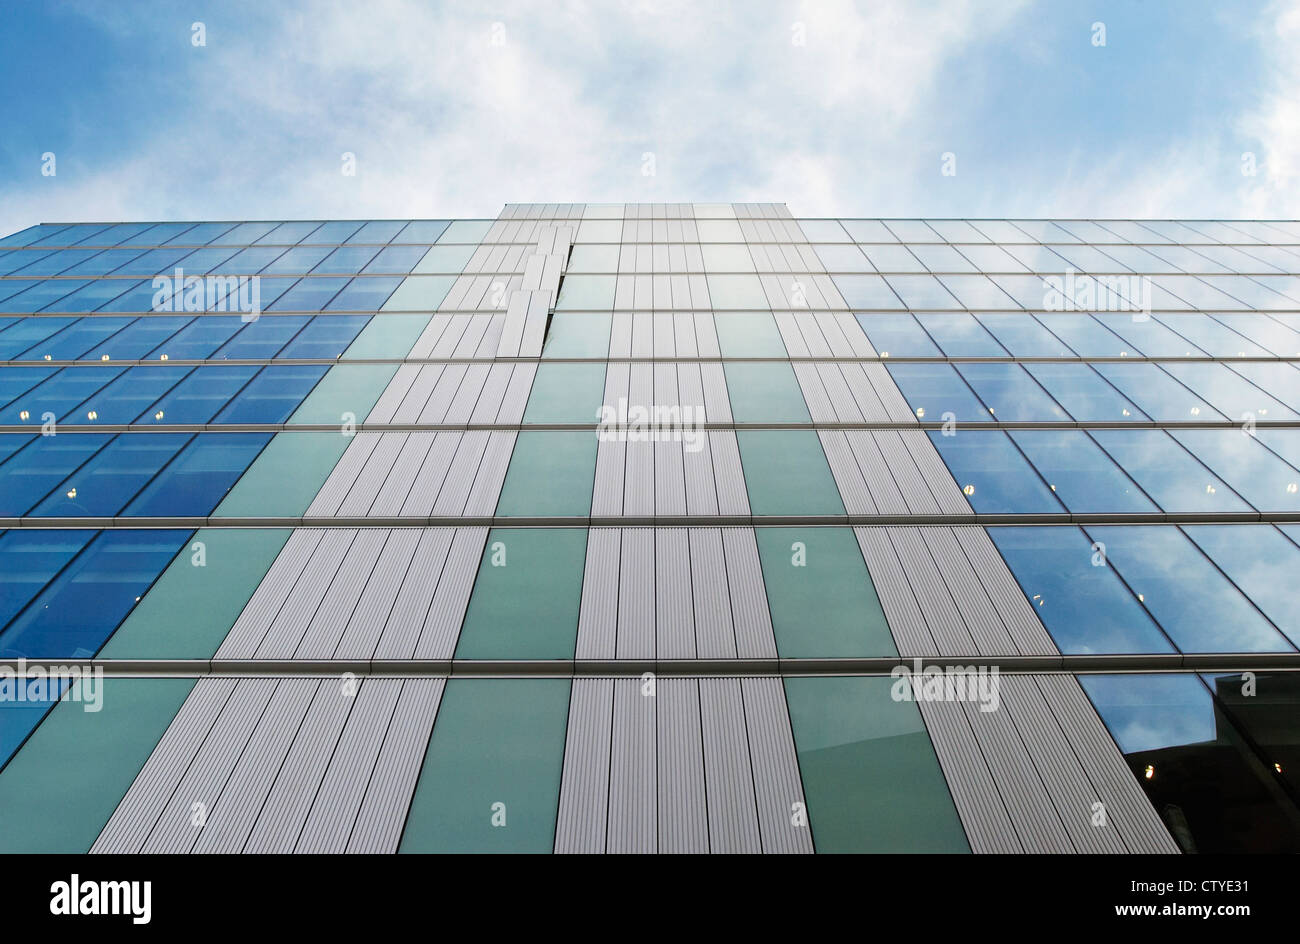 Architectural detail of a building's facade. Stock Photo